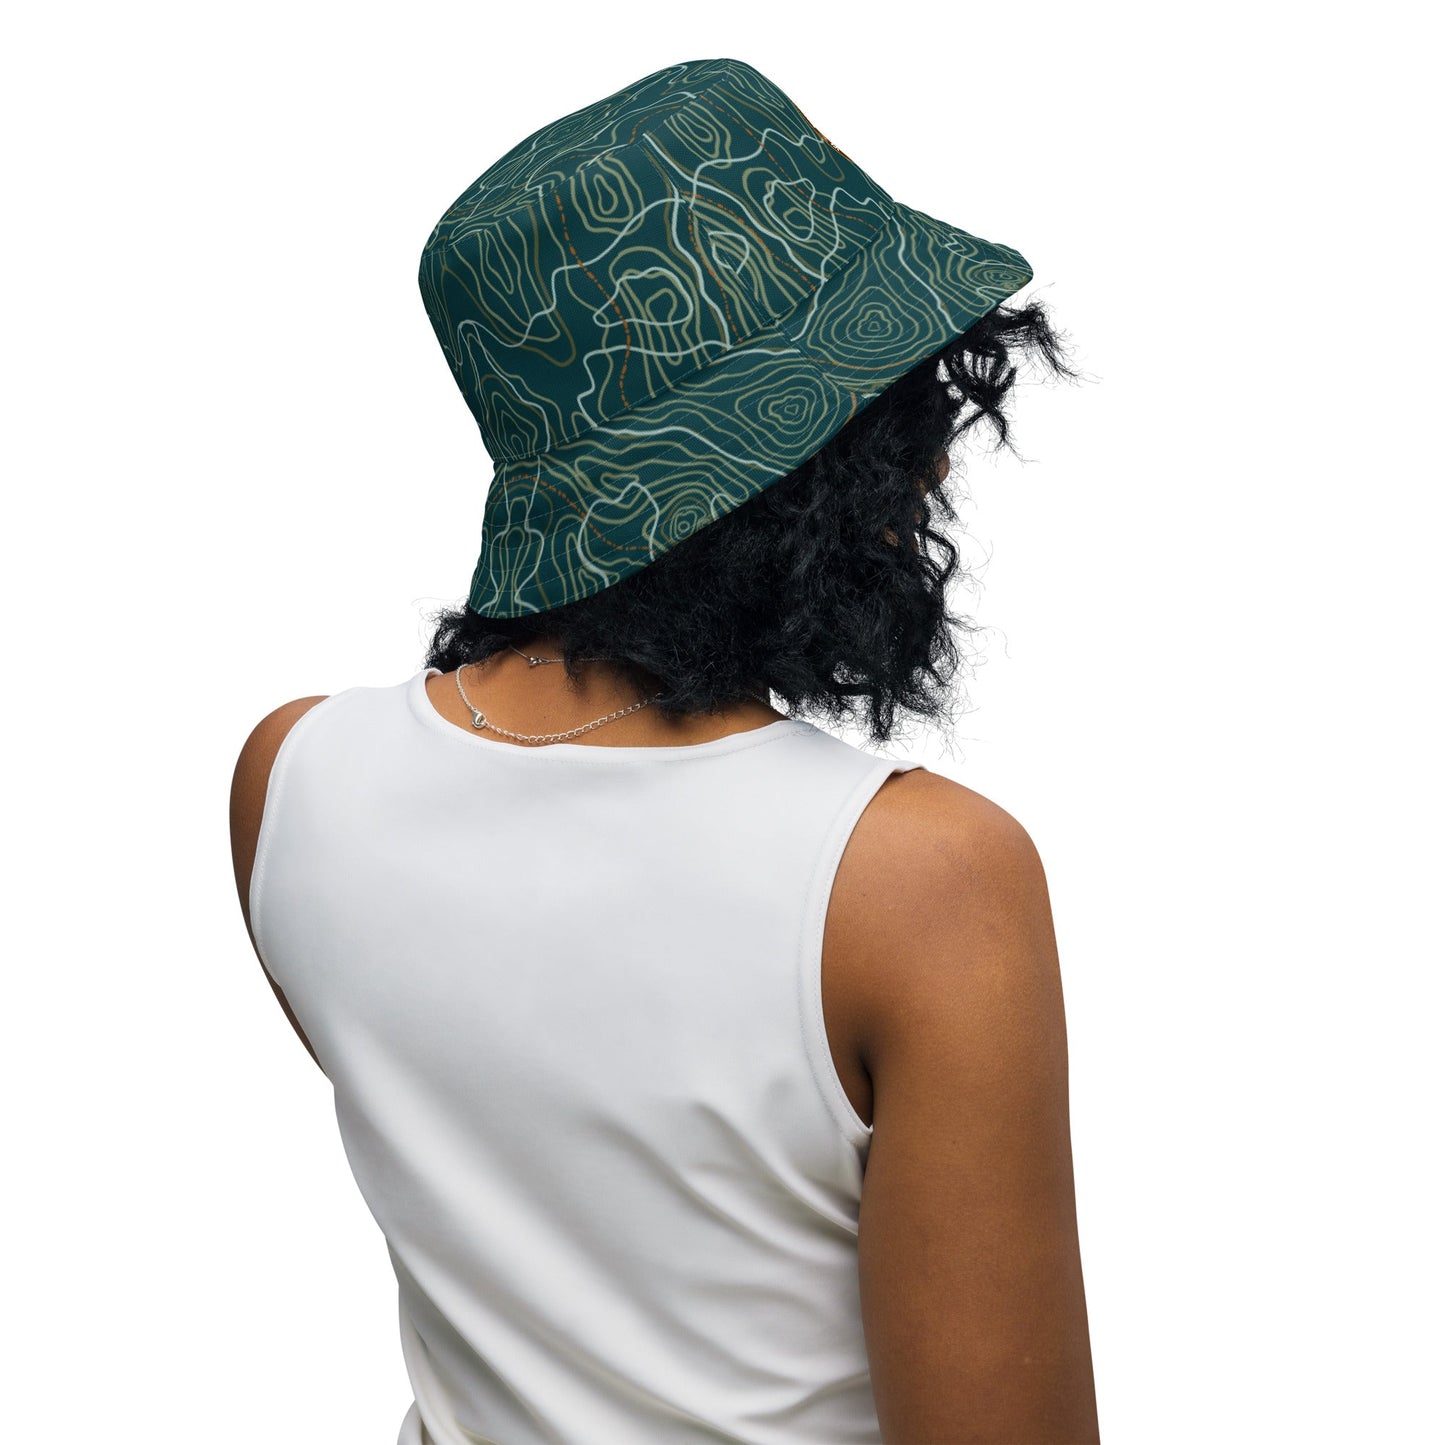 Compass Floral and Topo Map Reversible bucket hat - Appalachian Bittersweet - bucket hat